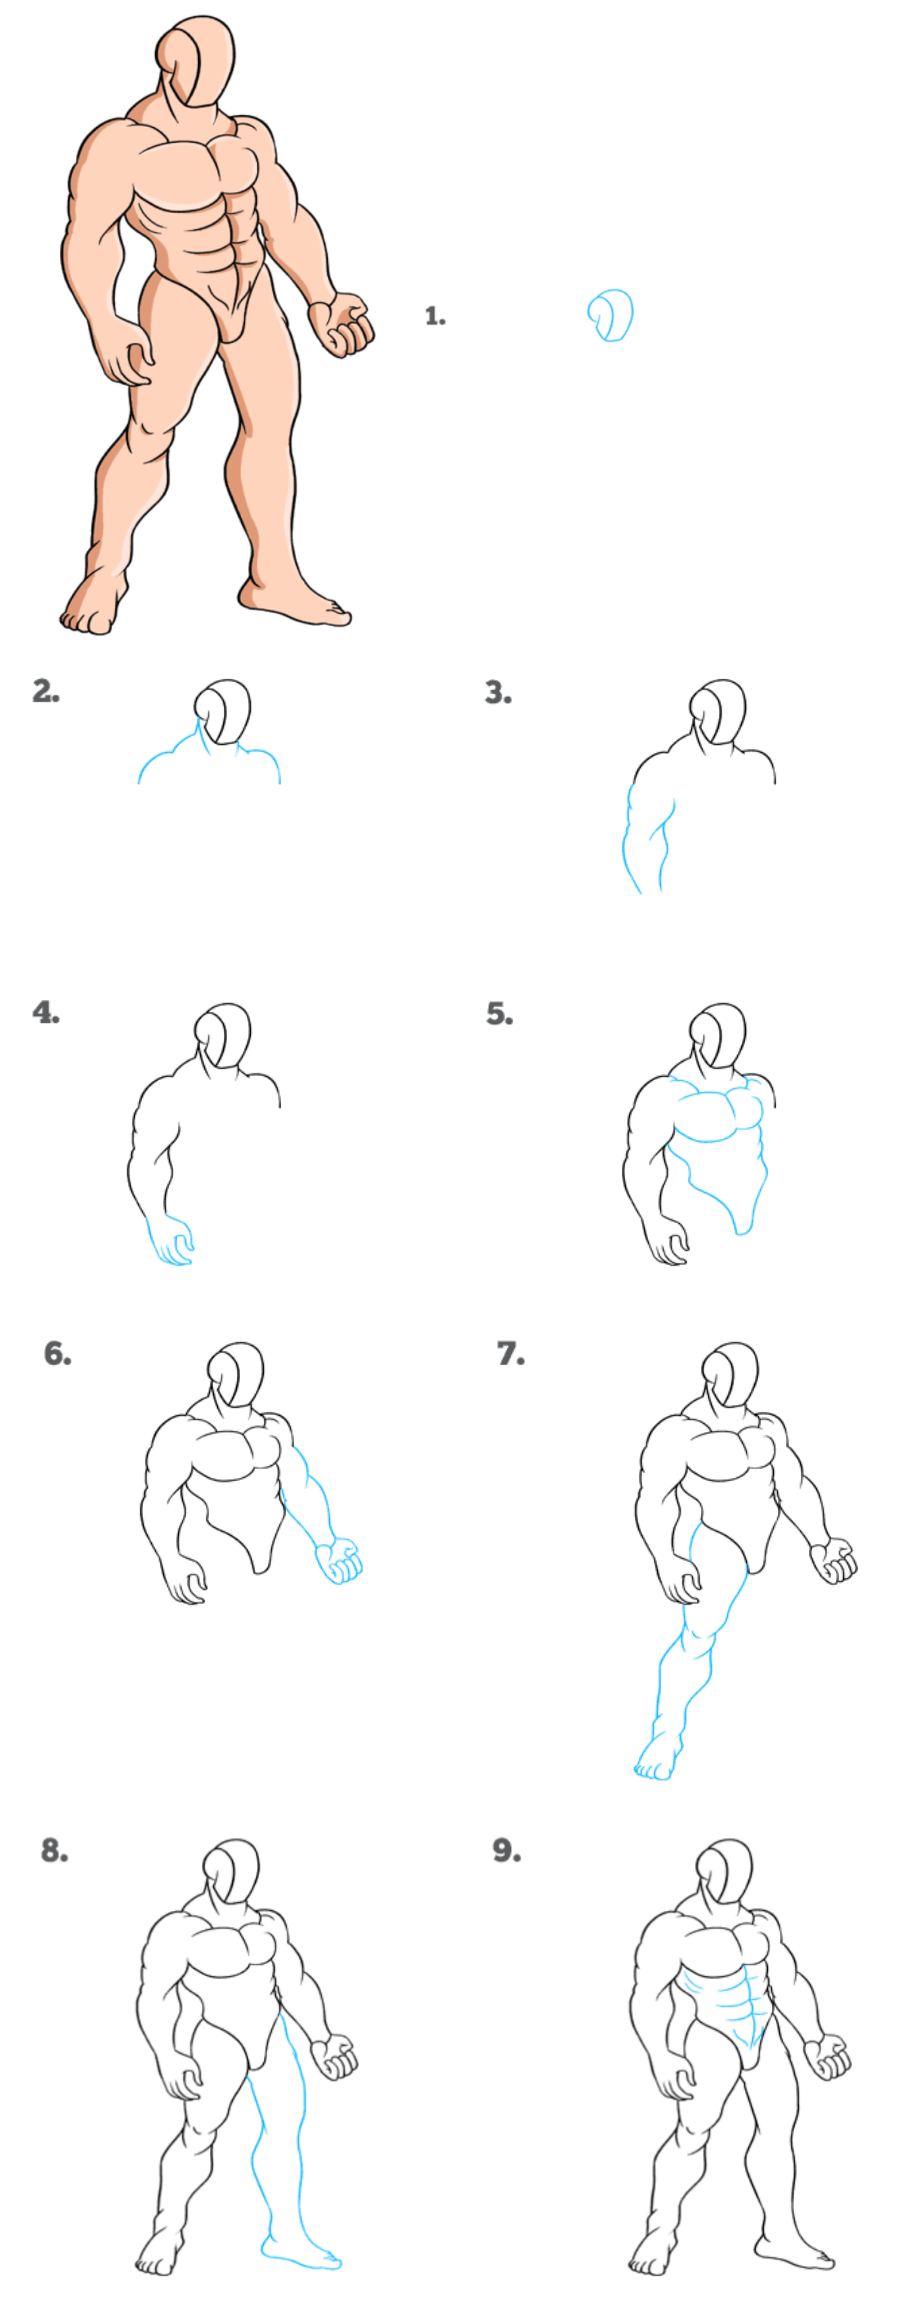 How to draw muscle